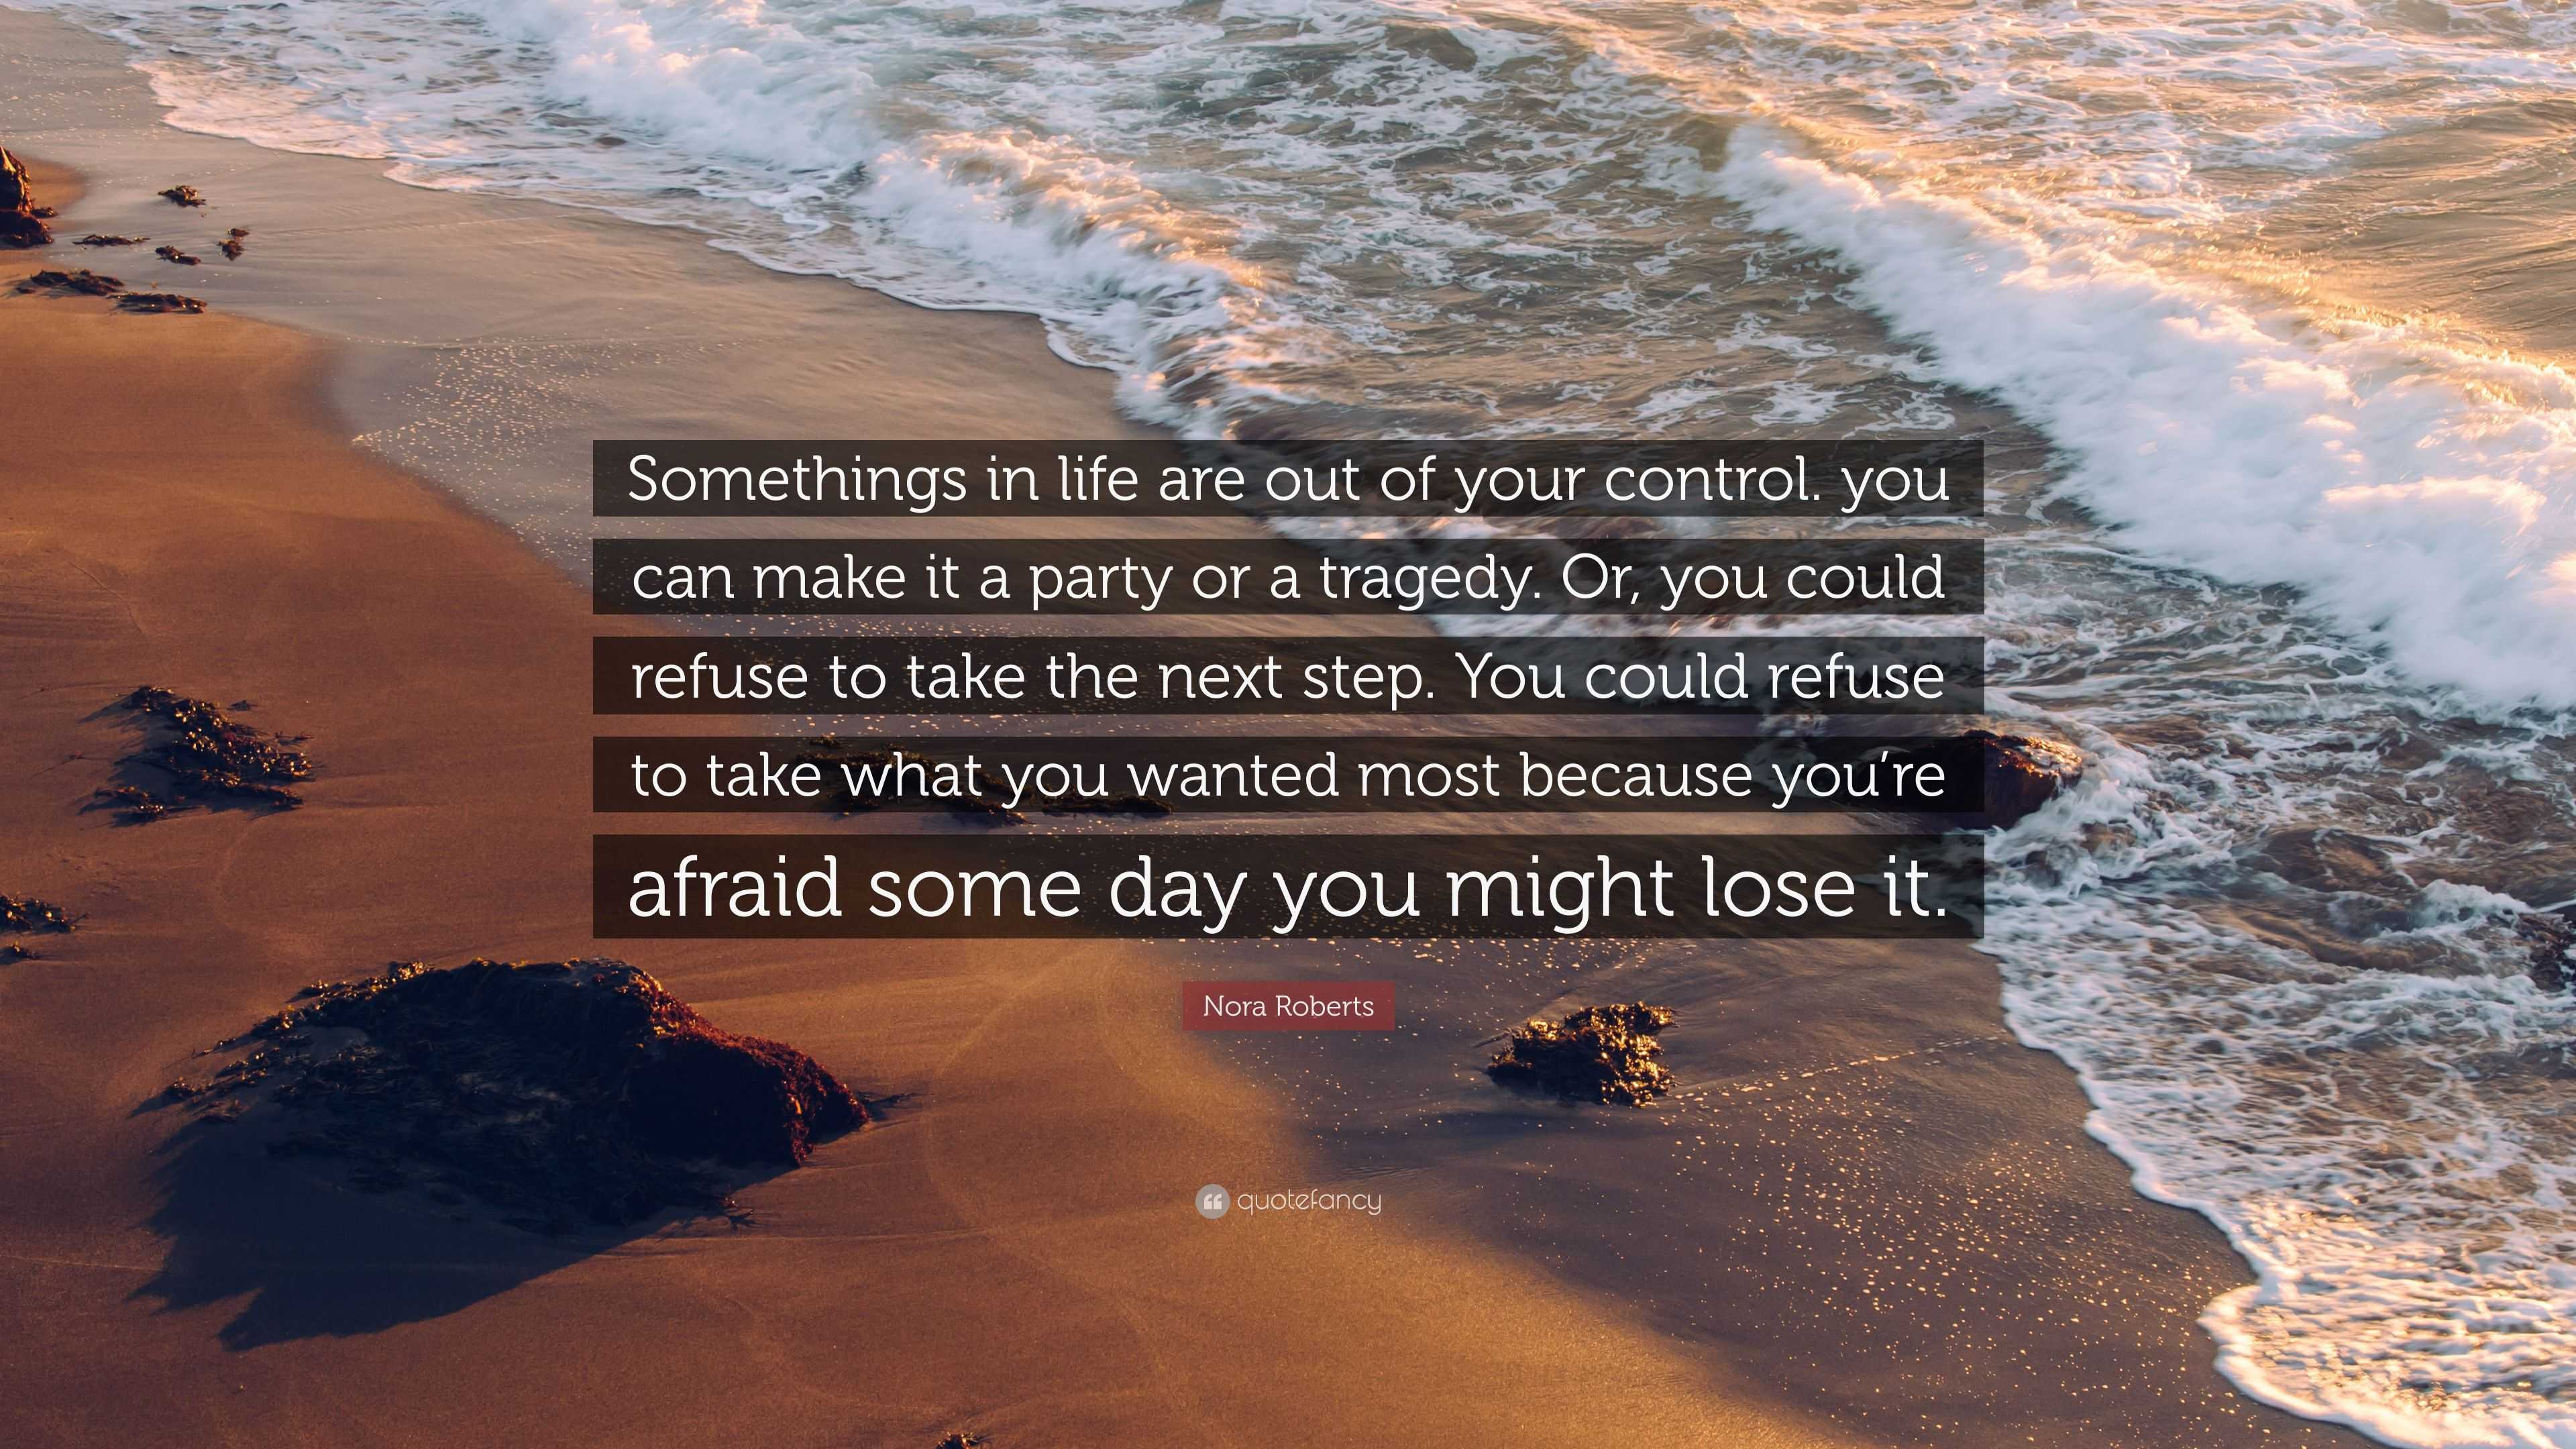 Nora Roberts Quote “Somethings in life are out of your control you can